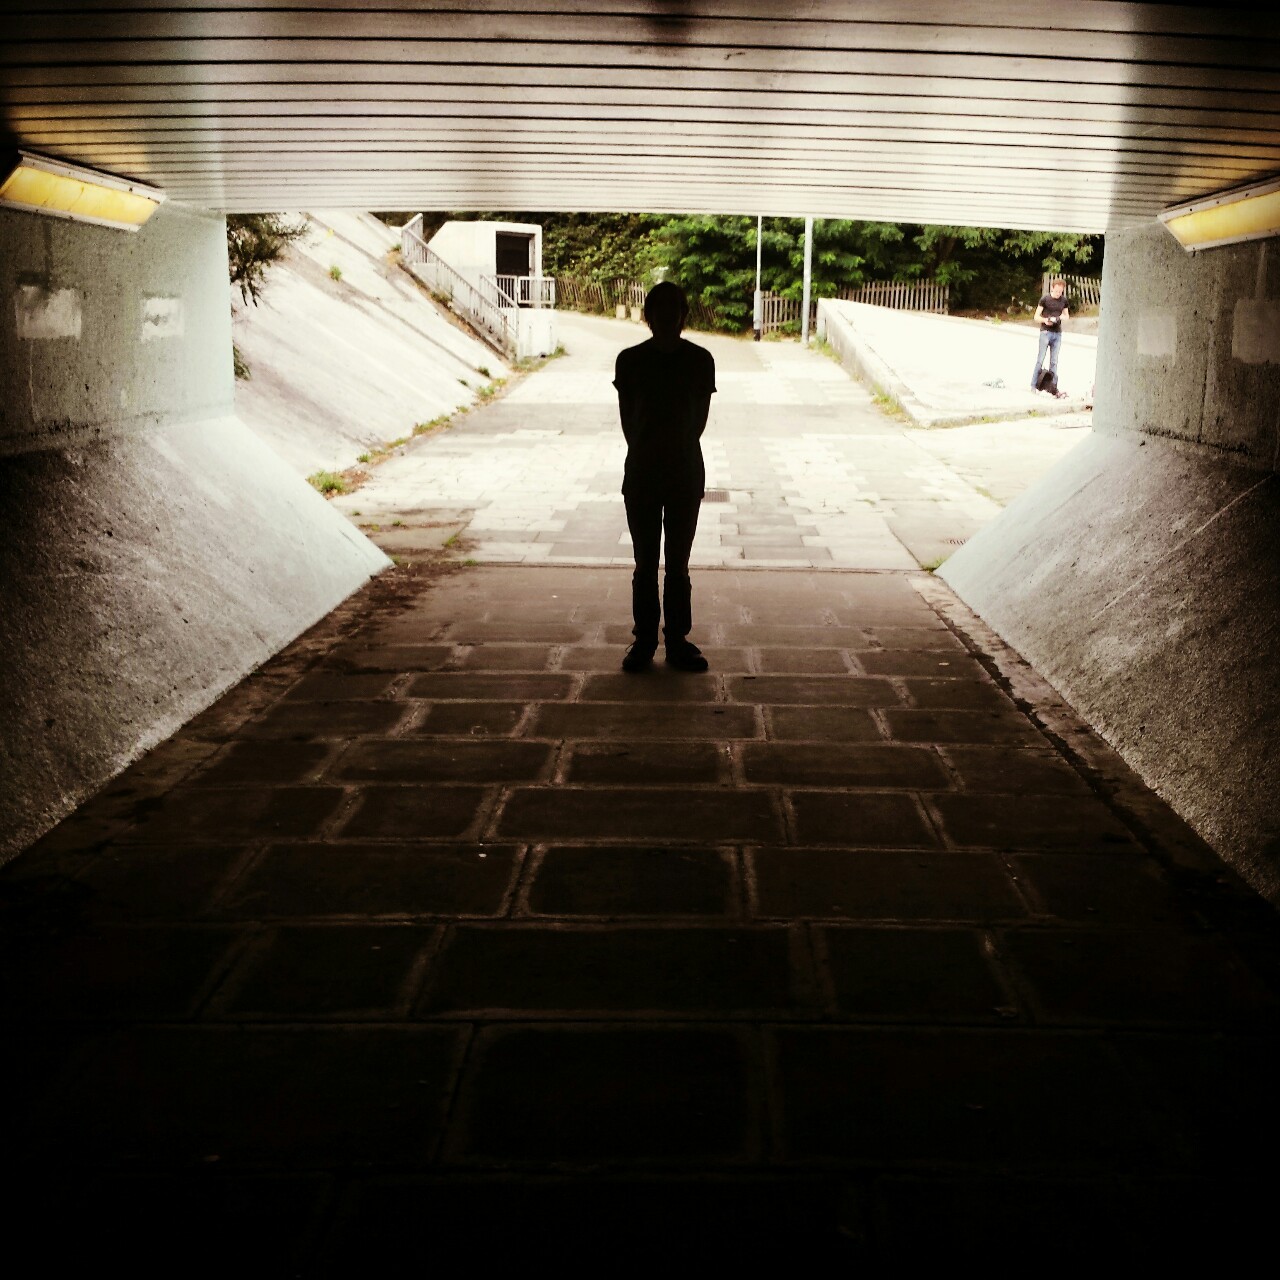 A few days back I travelled to Wandsworth, southwest London to see this underpass made famous in Stanley Kubricks ‘A Clockwork Orange’.